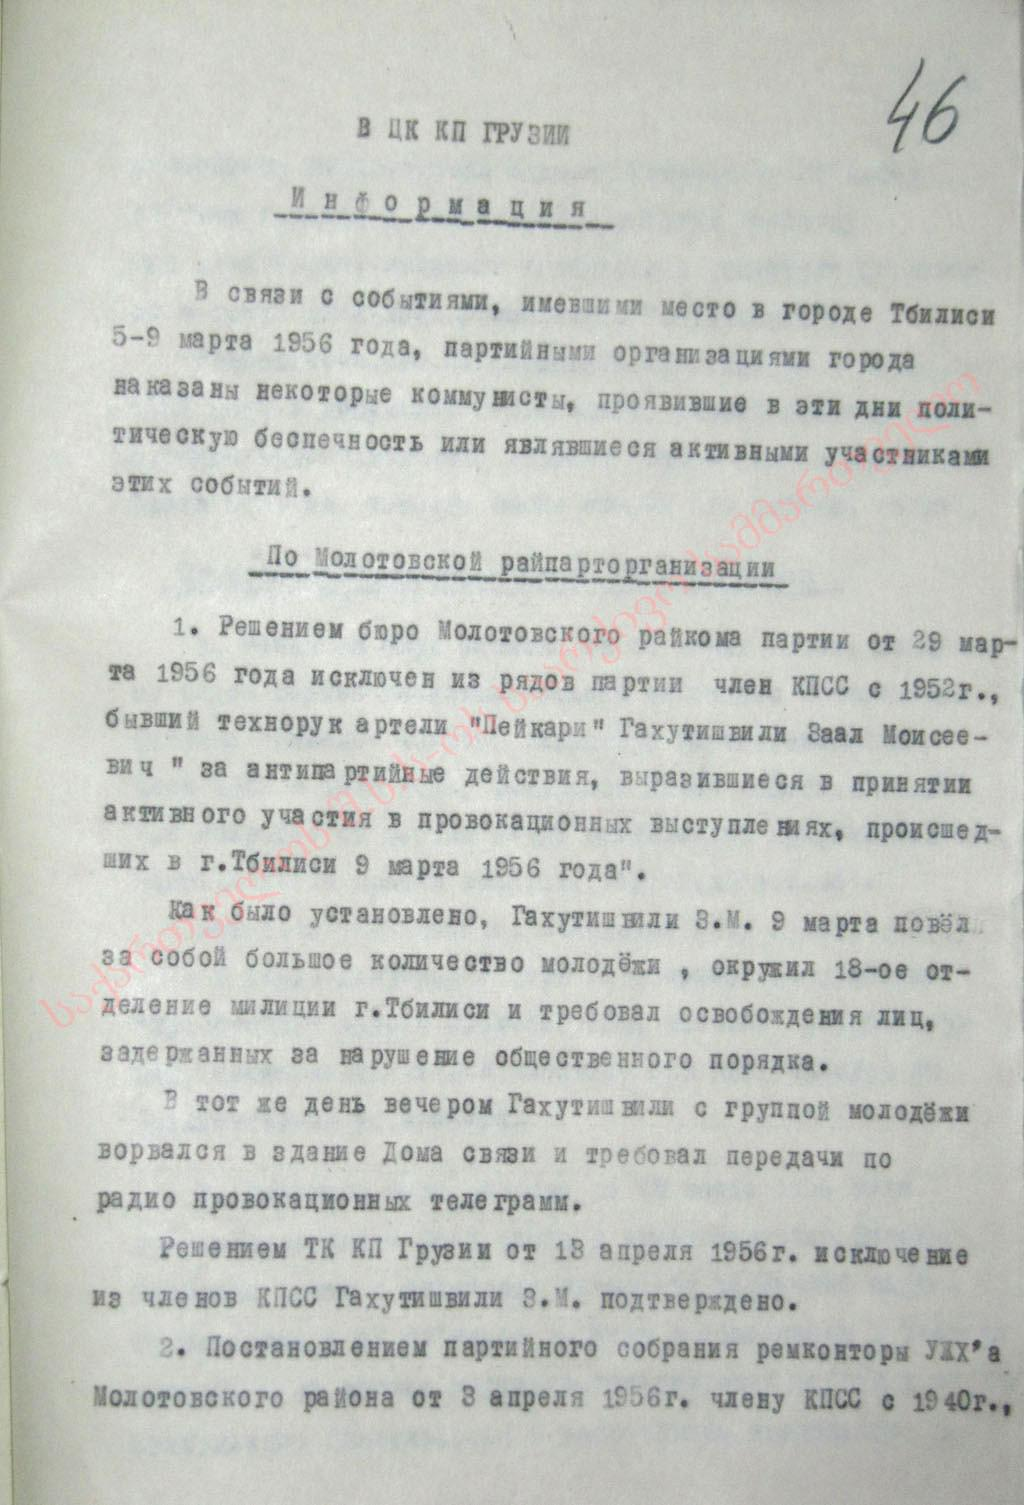 A report of N. Chakhrakia, a Secretary of Tbilisi Committee of Communist Party of Georgia